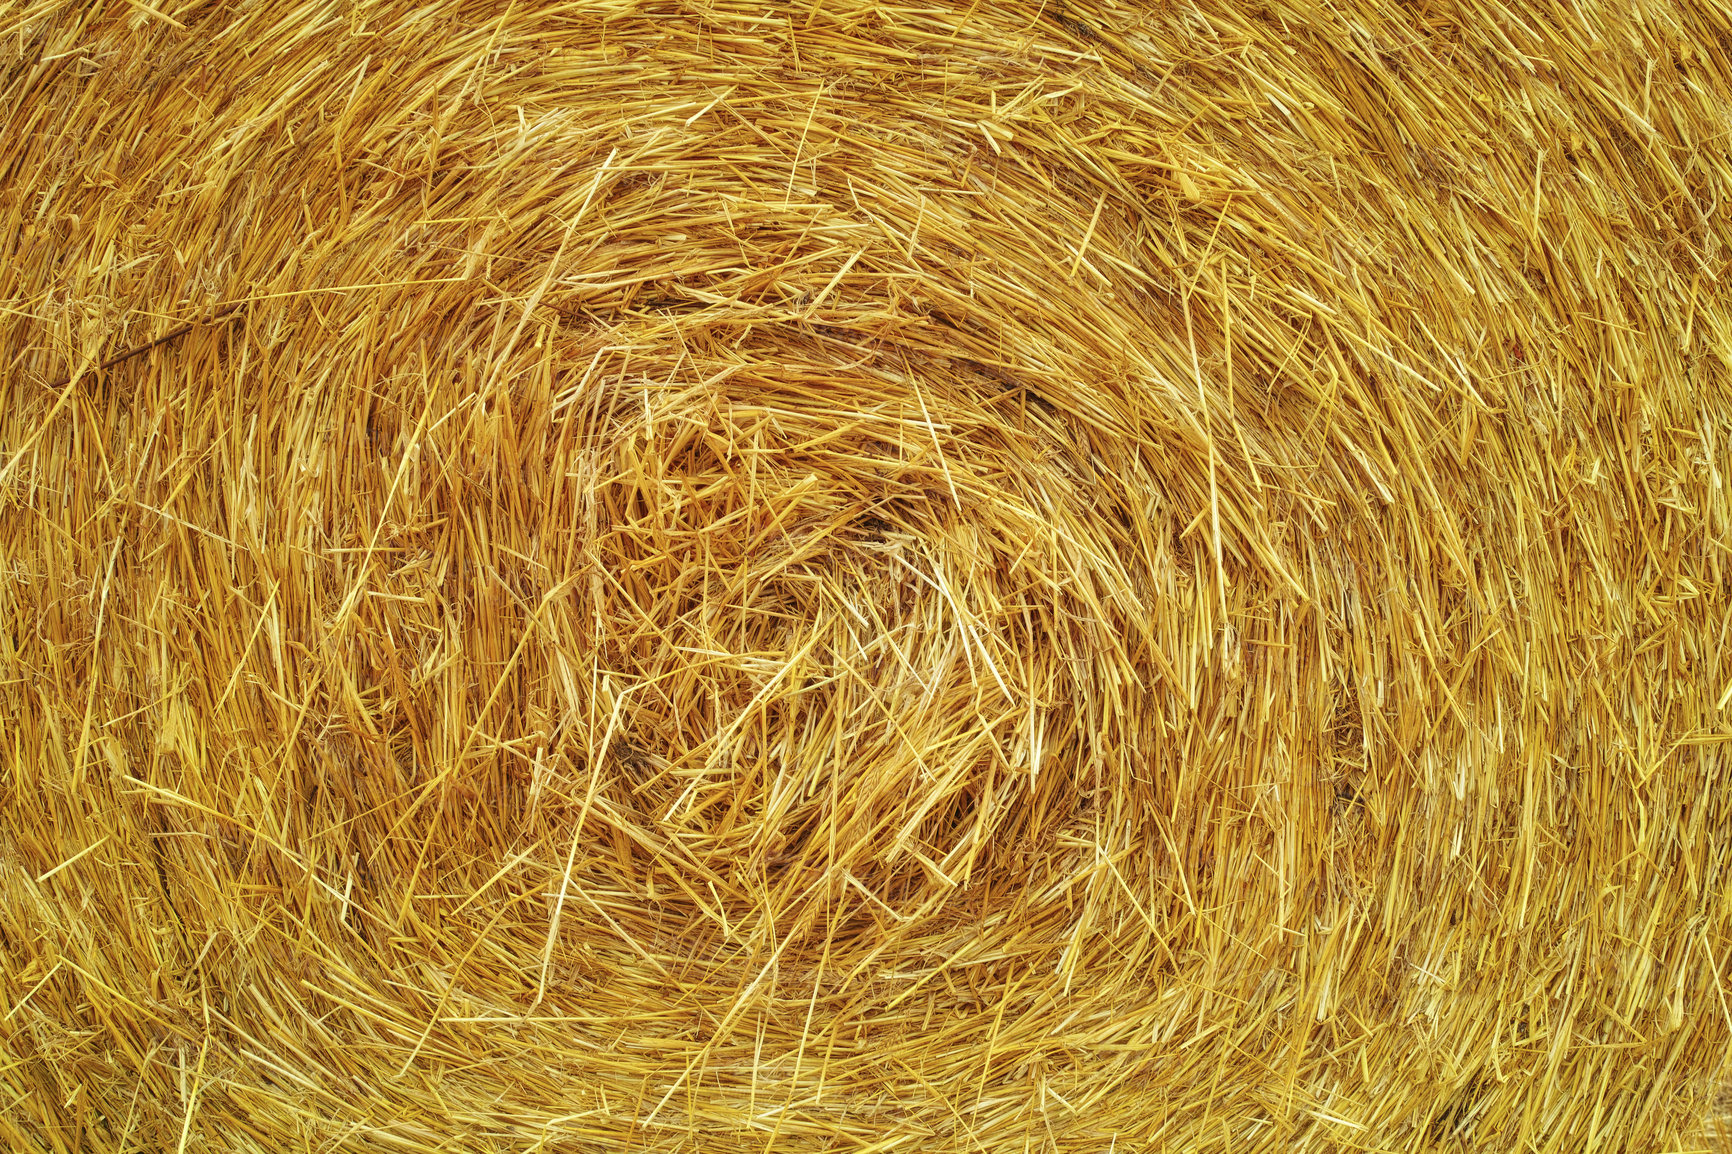 Buy stock photo Closeup image of a rolled up straw bale - cropped